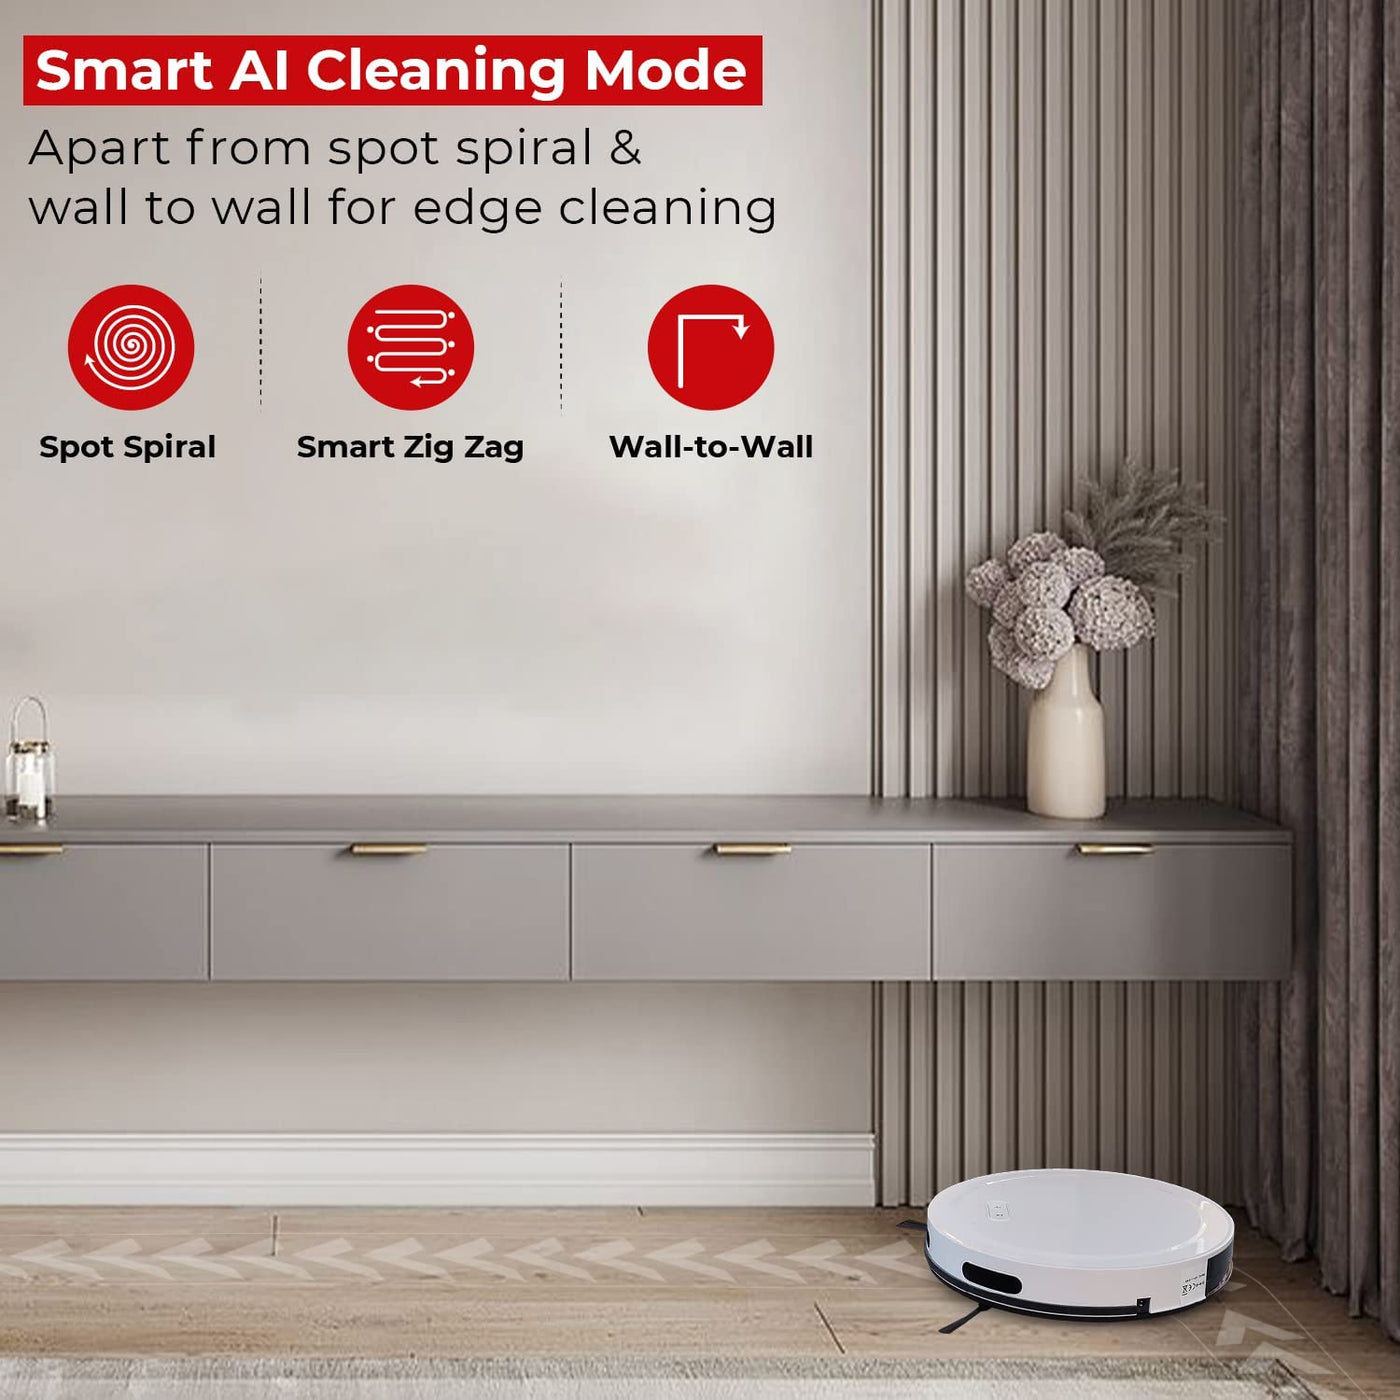 Milagrow Seagull Joy - 1500Pa Autoboost Suction Robotic Vacuum Cleaner, Slight Wet Mopping Without Water Tank, Scheduling, Mapping, Self-Charge, 3 Stage Cleaning, APP (White)